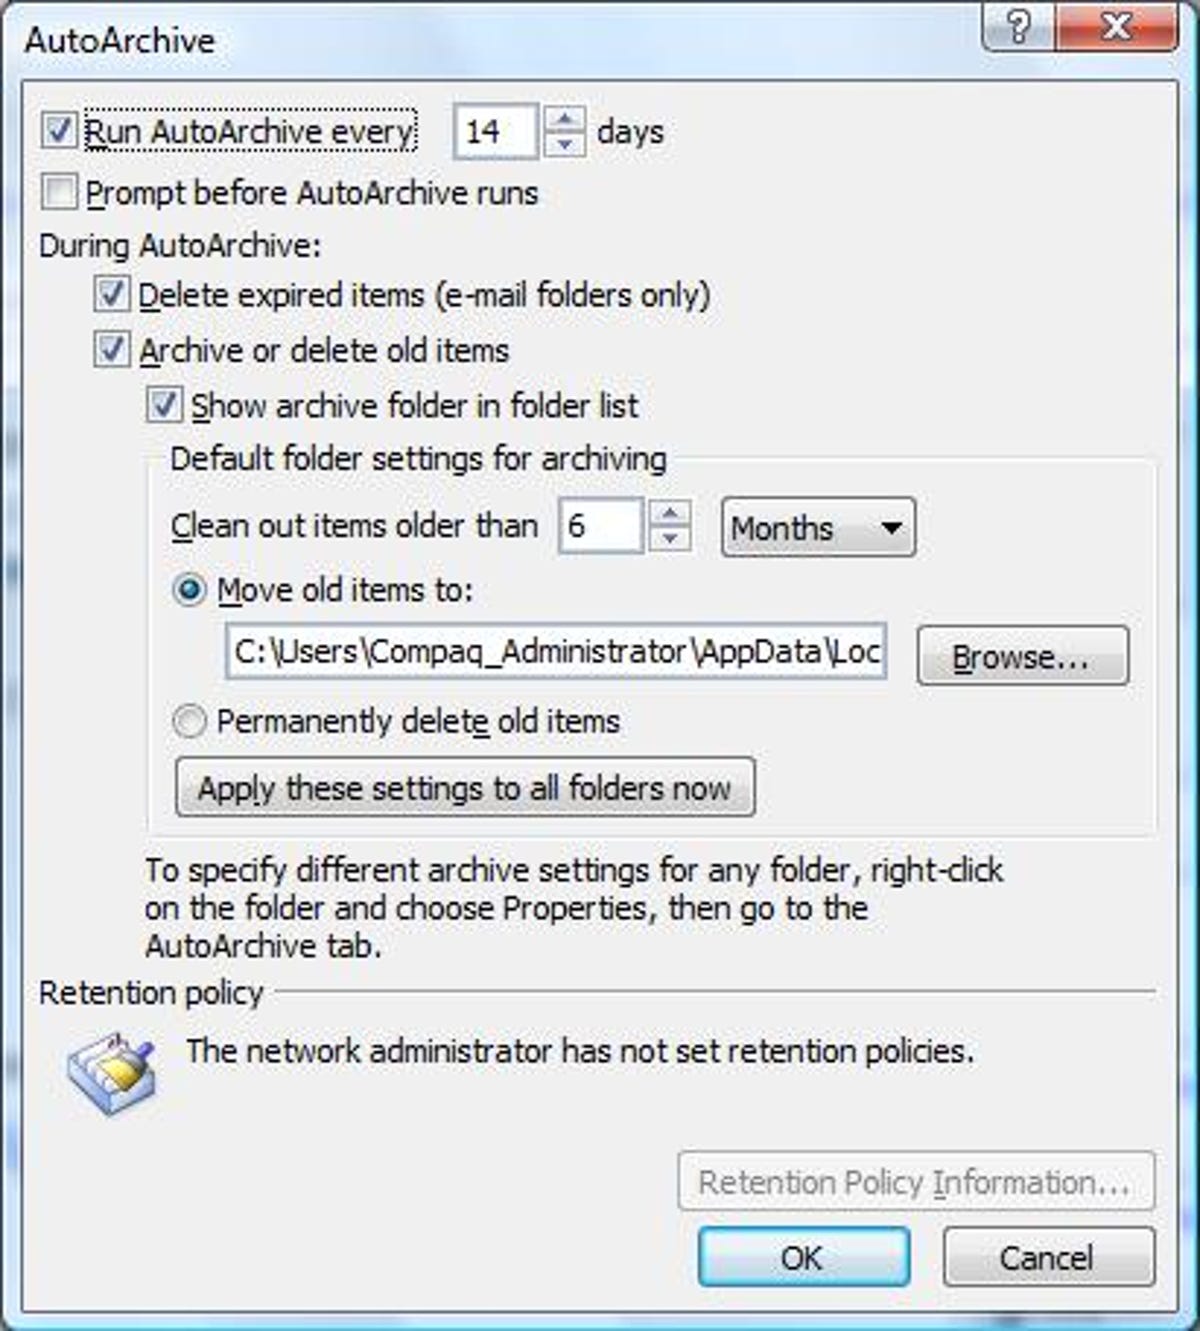 Microsoft Outlook's AutoArchive options